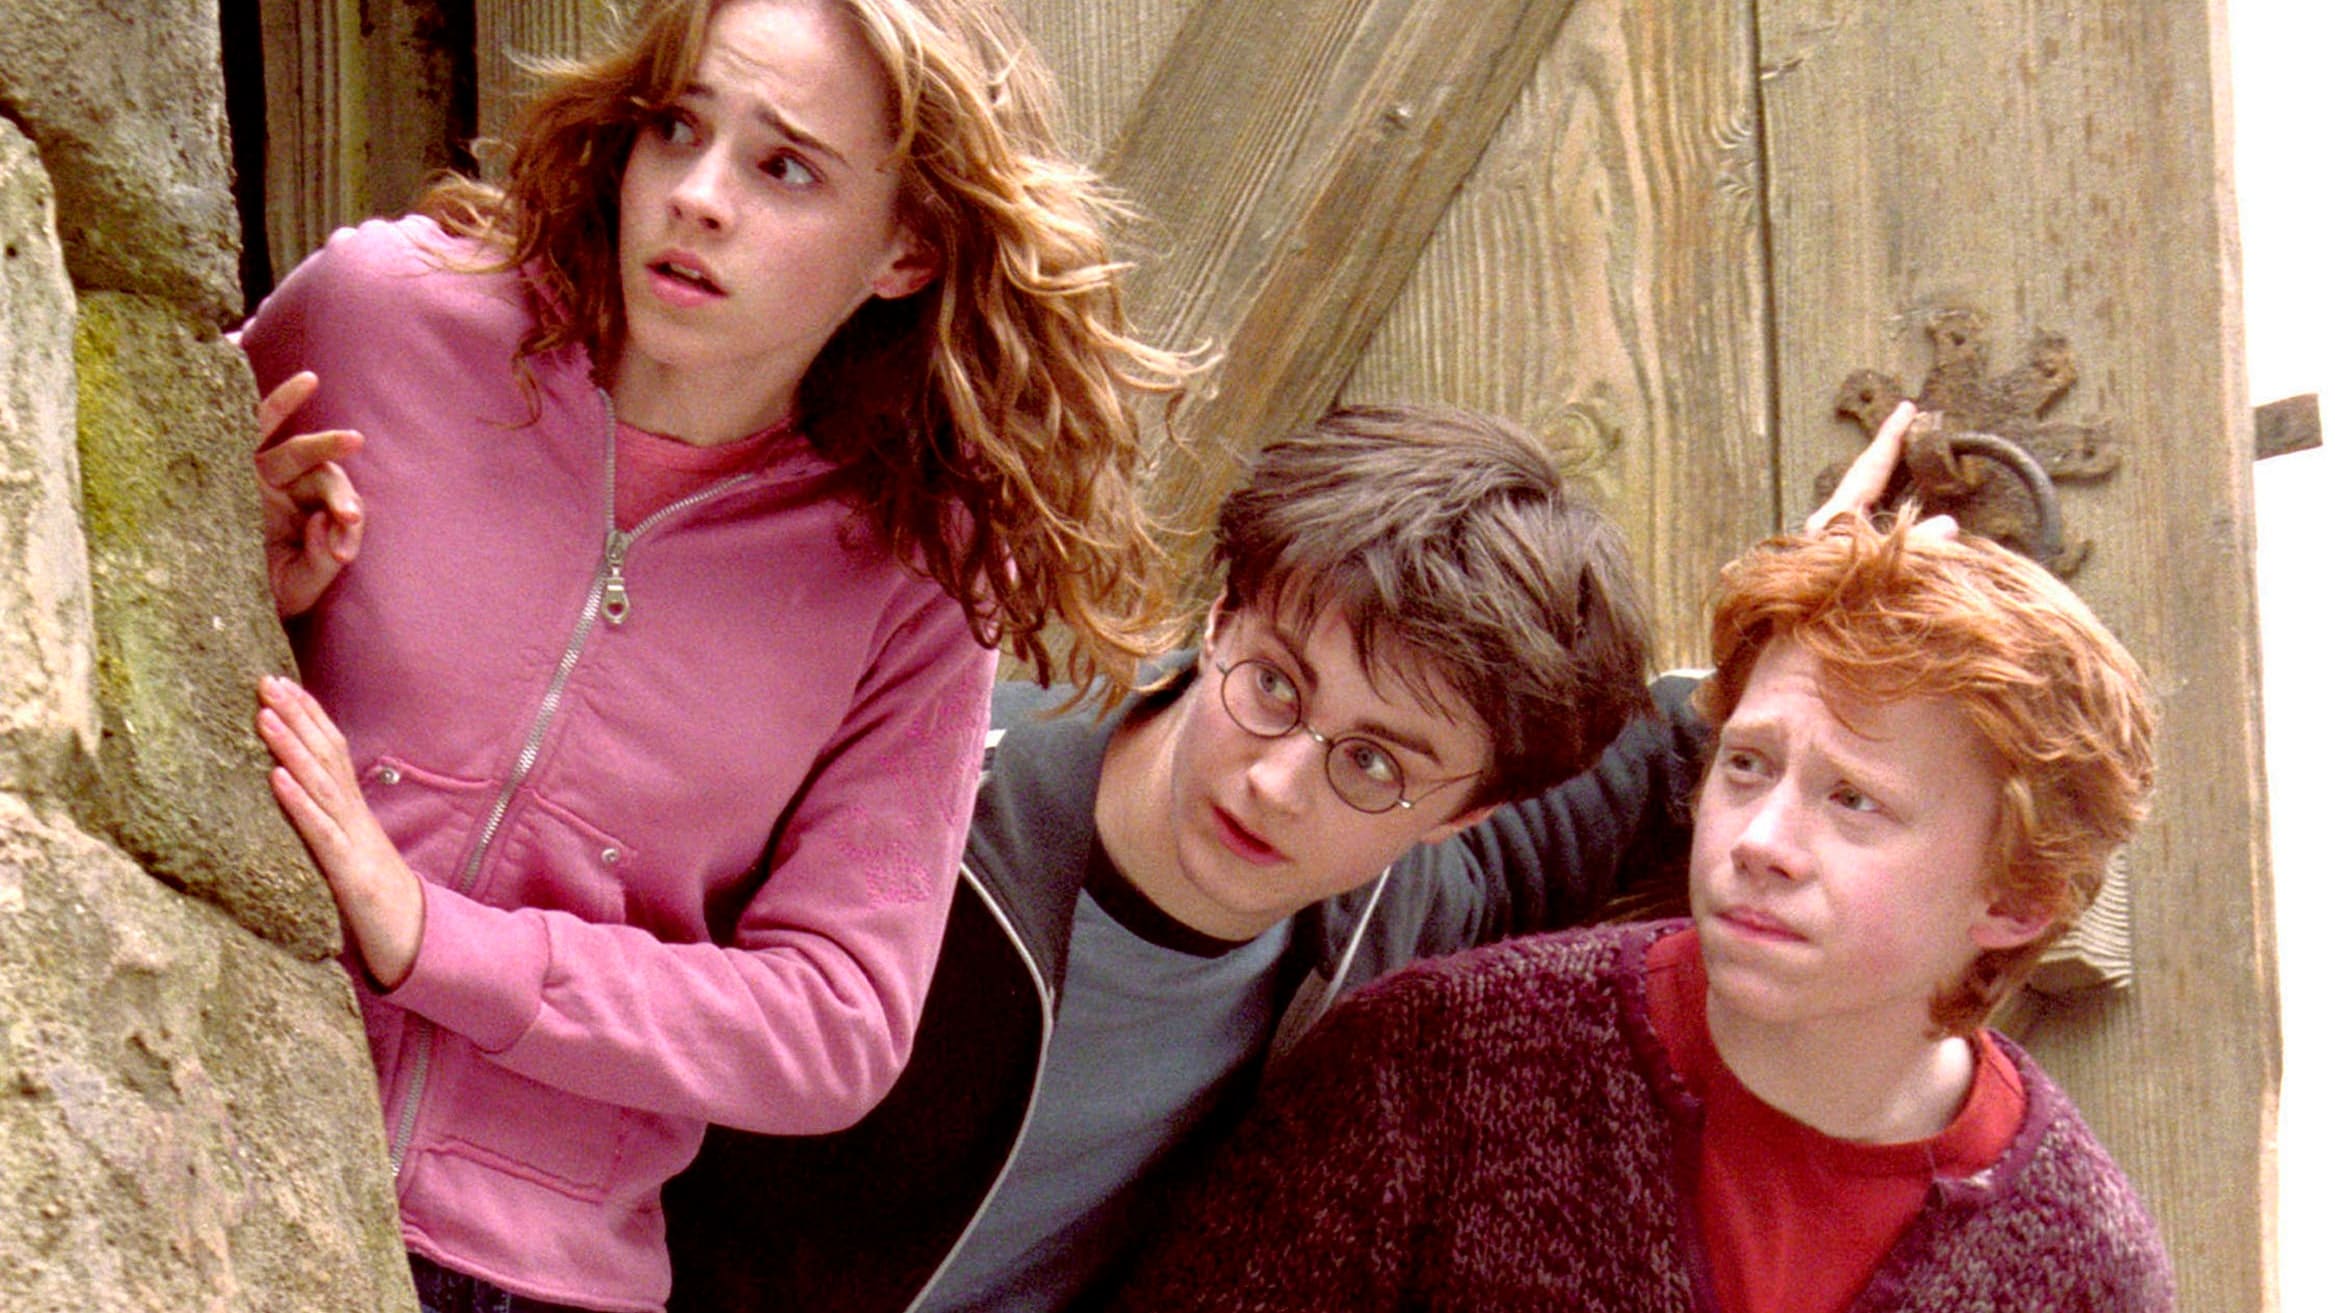 Things You May Not Have Noticed in the Harry Potter Movies!!!